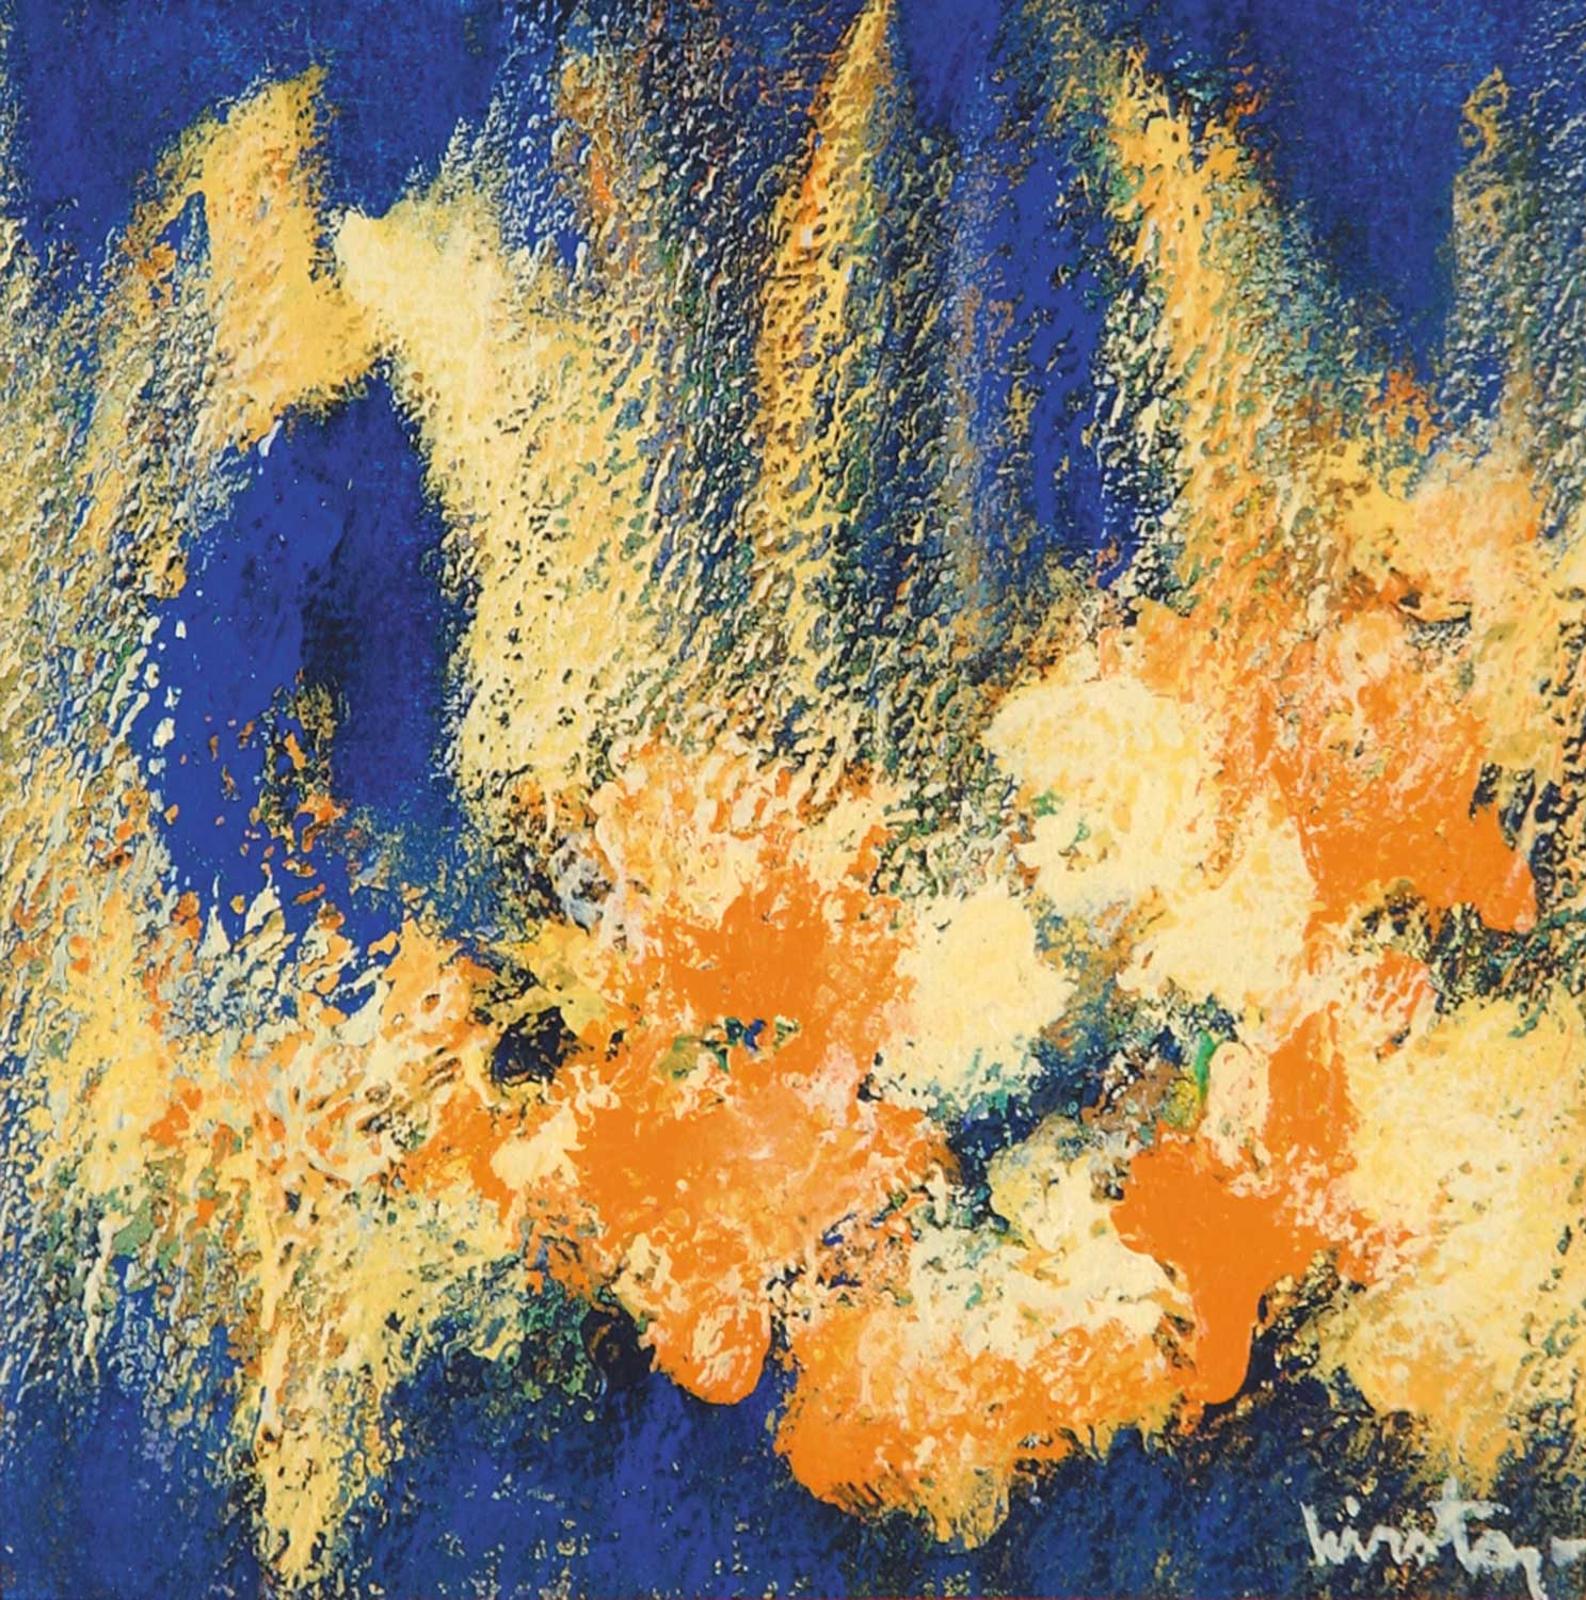 Temistokl Vyrsta Wirsty - Untitled - Abstract Yellow, Orange and Blue